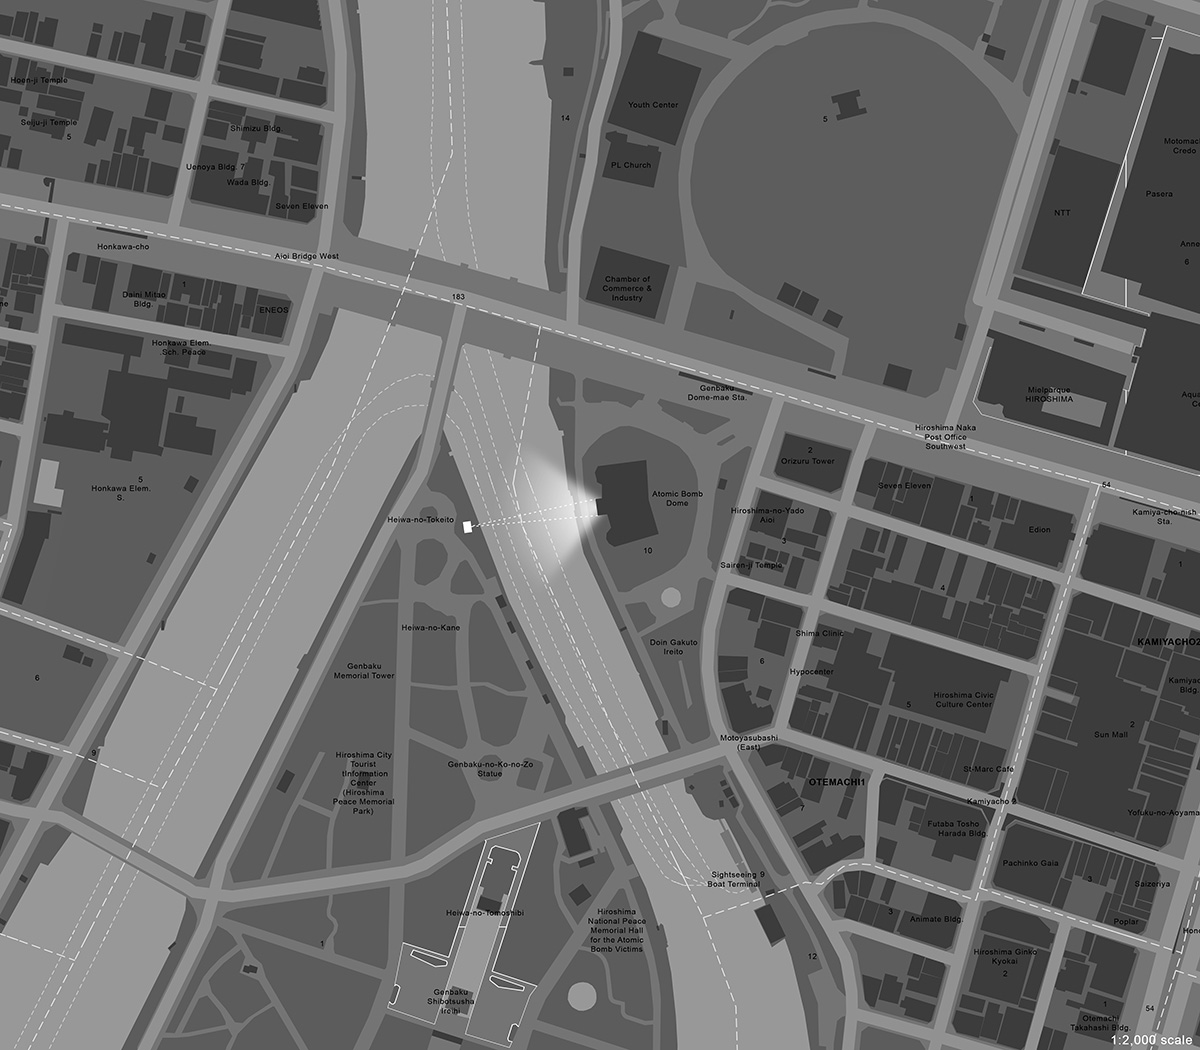 Aerial map of a section of Hiroshima, Japan, showing the location of the Atomic Bomb Dome along the edge of the Motoyasu River. A highlighted area on the west facade of the building shows the location of Wodiczko’s projection.